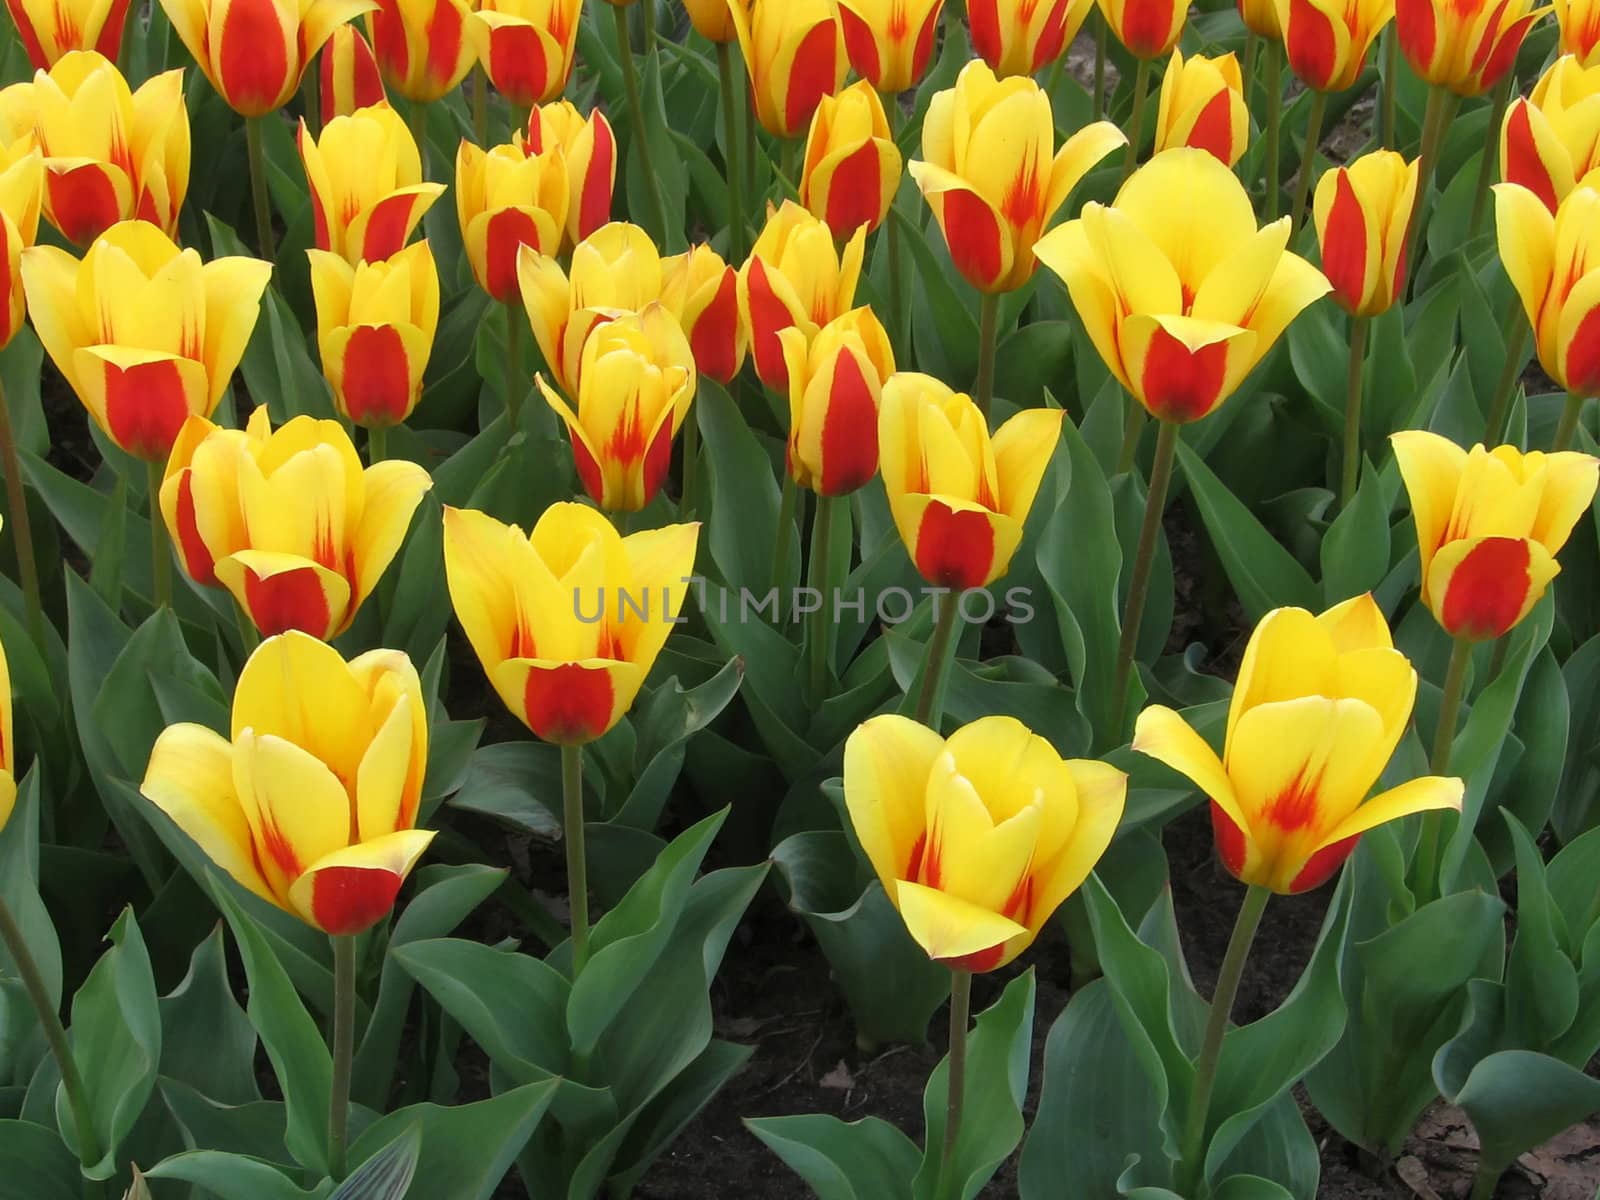 Background of various yellow tulips on the flowerbed